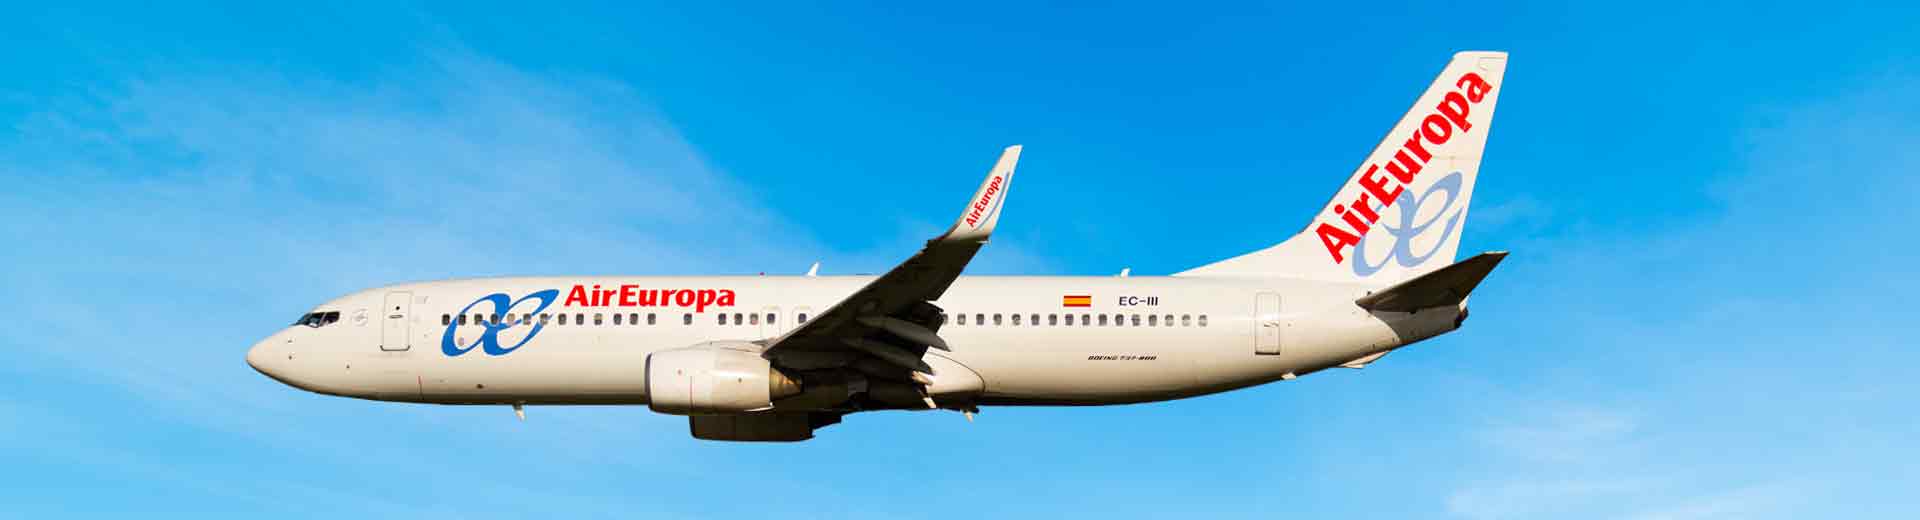 Airline AirEuropa-hero